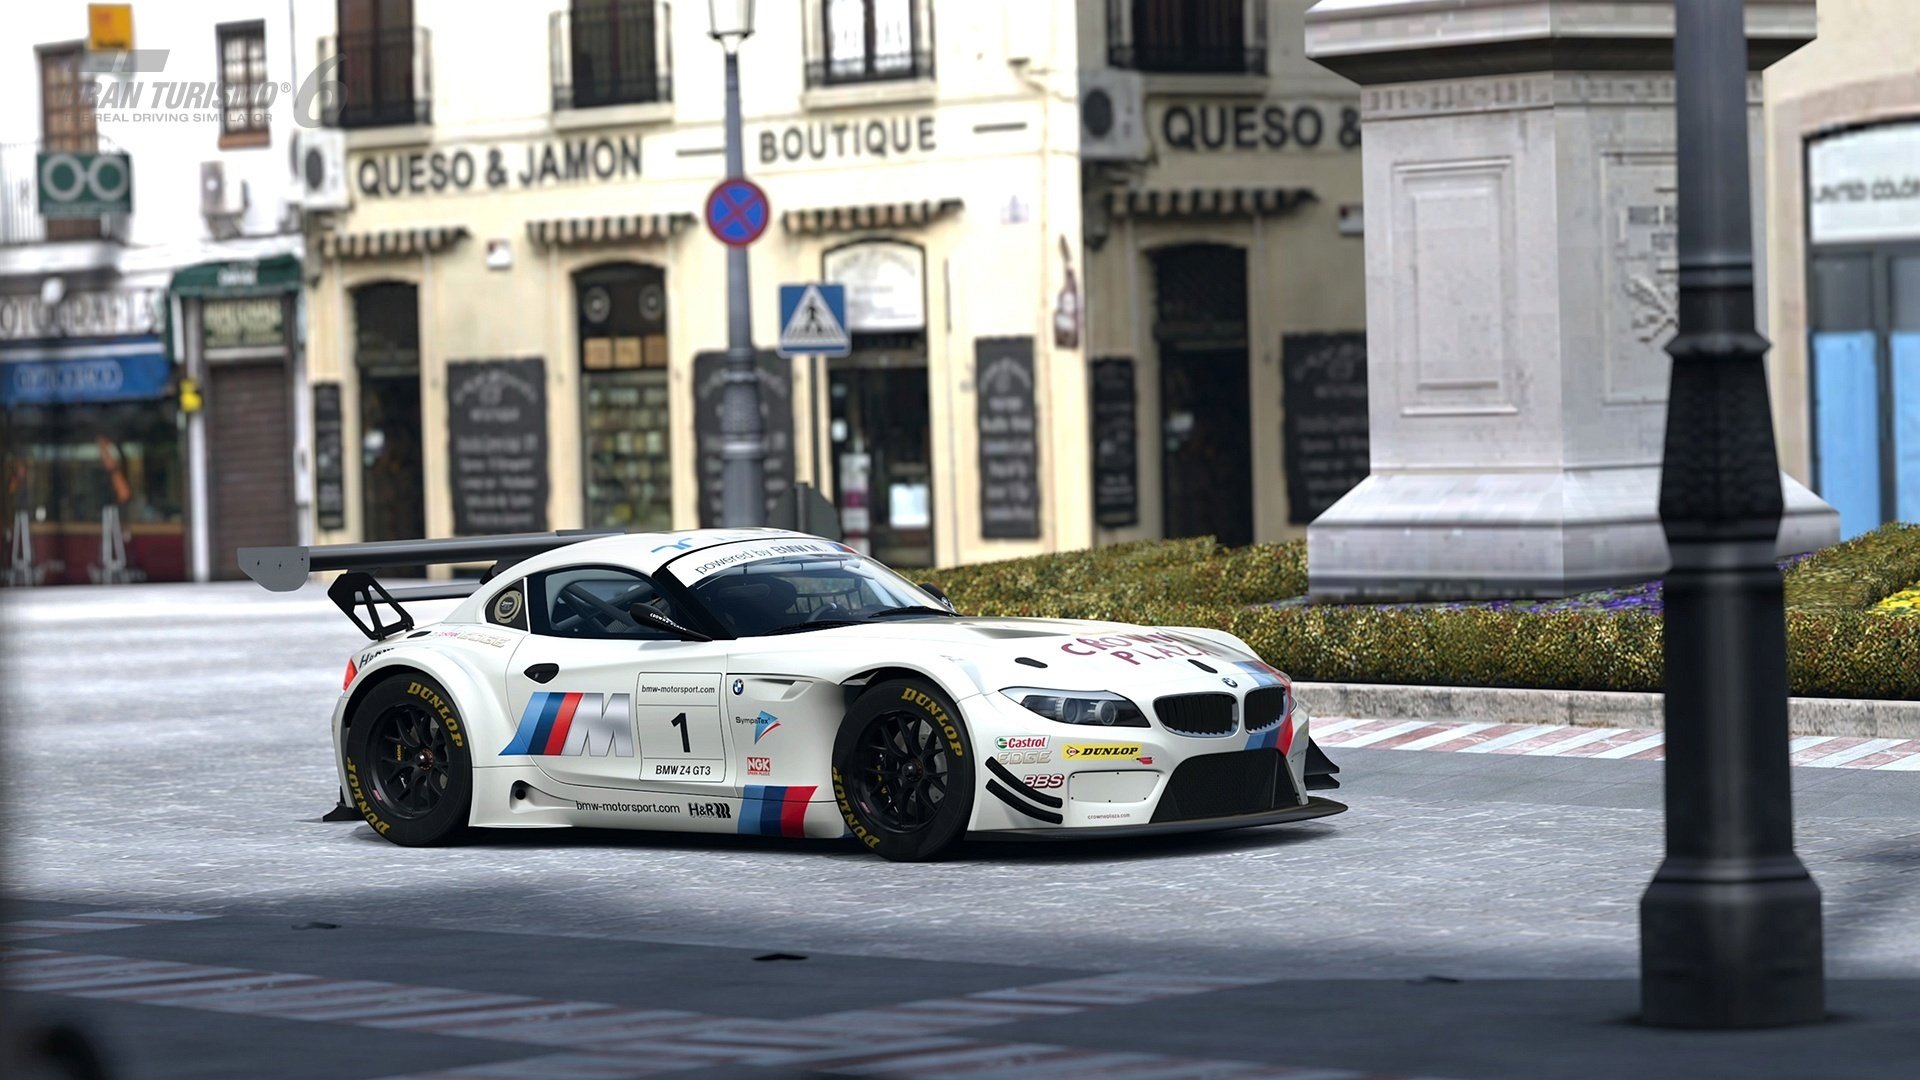 Bmw Z4 Gt3 Wallpapers